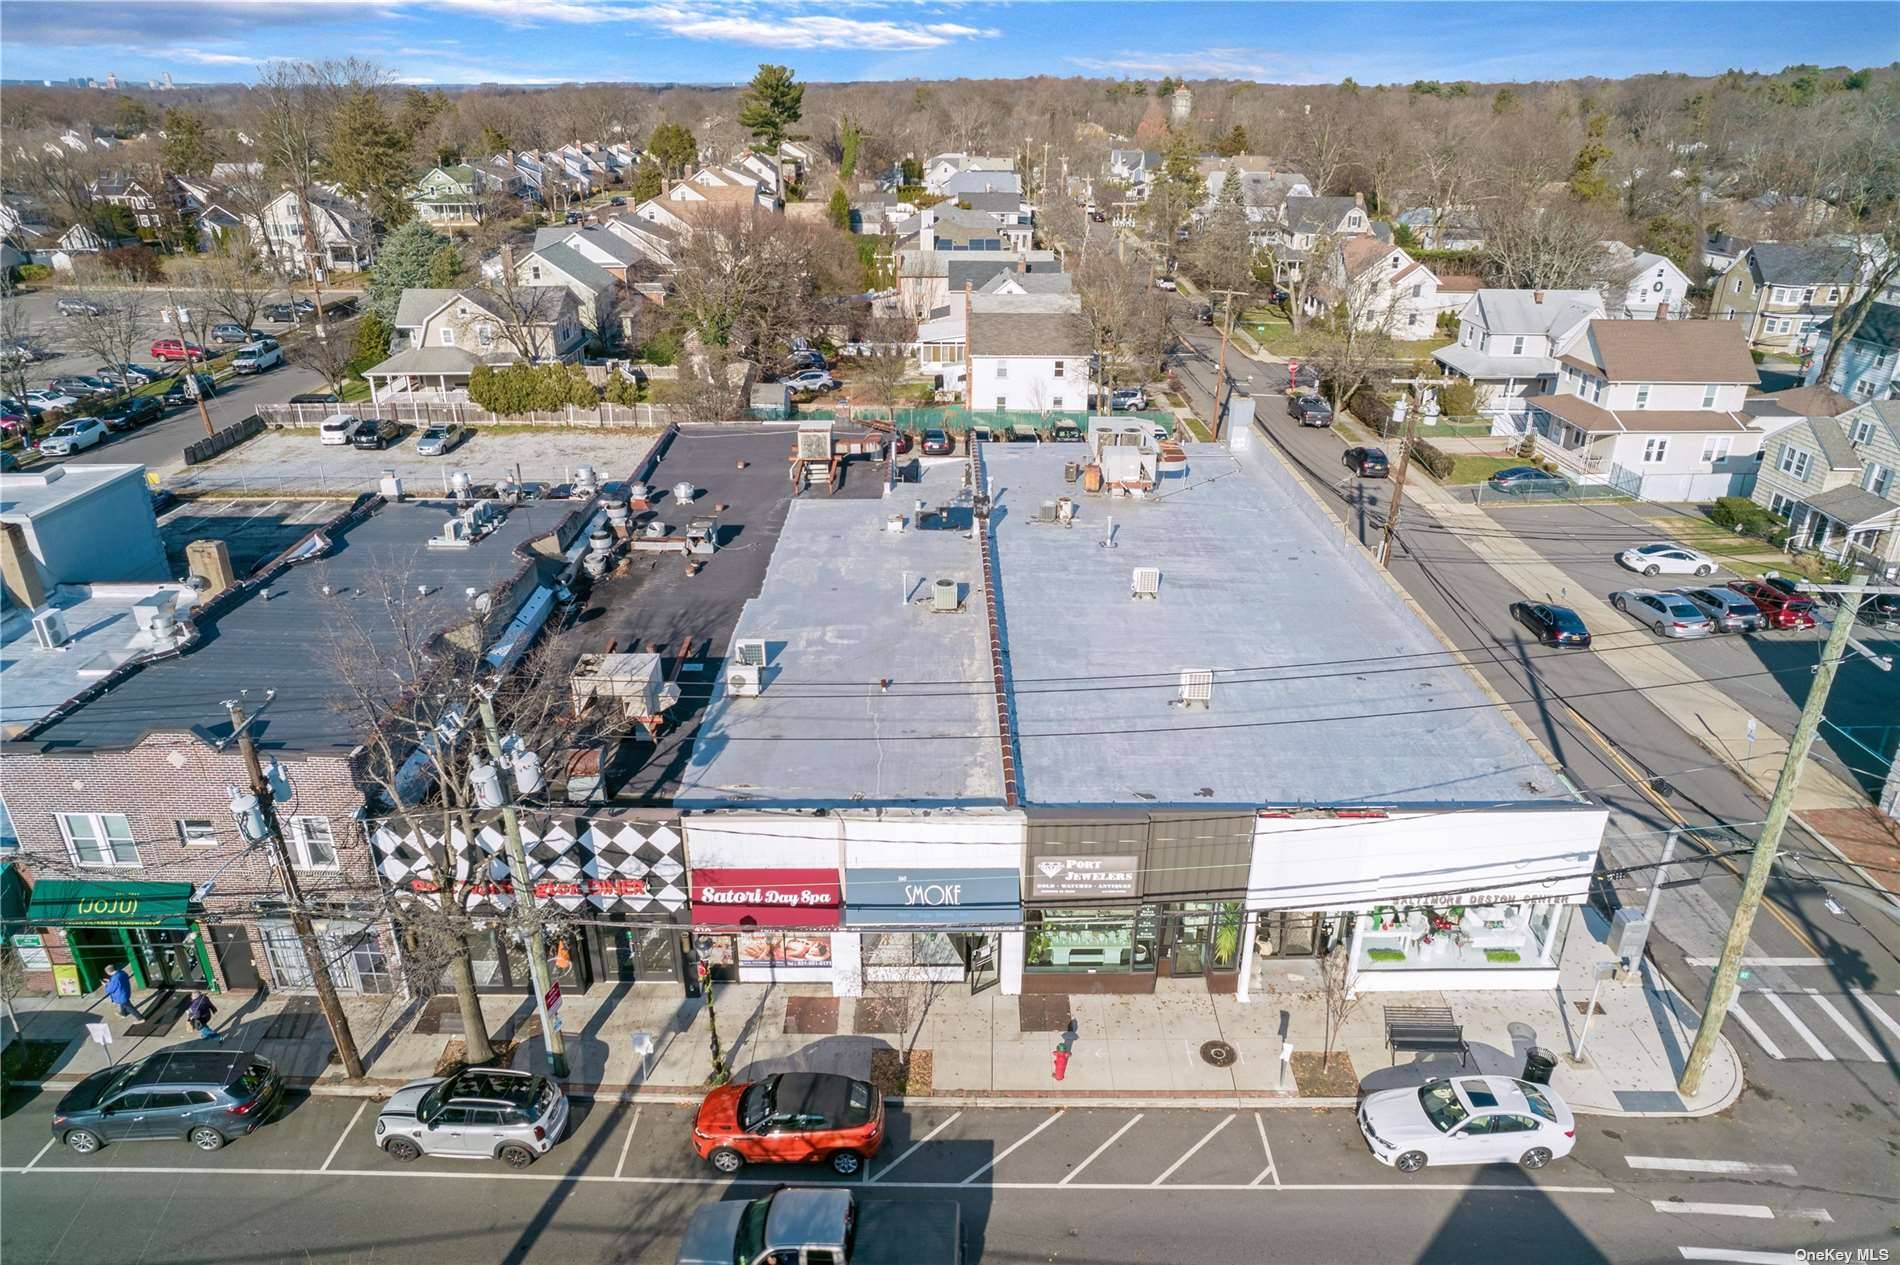 Amazing Opportunity To Own A Shopping Center With High Visibility In Prime Location Across From Port Washington Lirr.